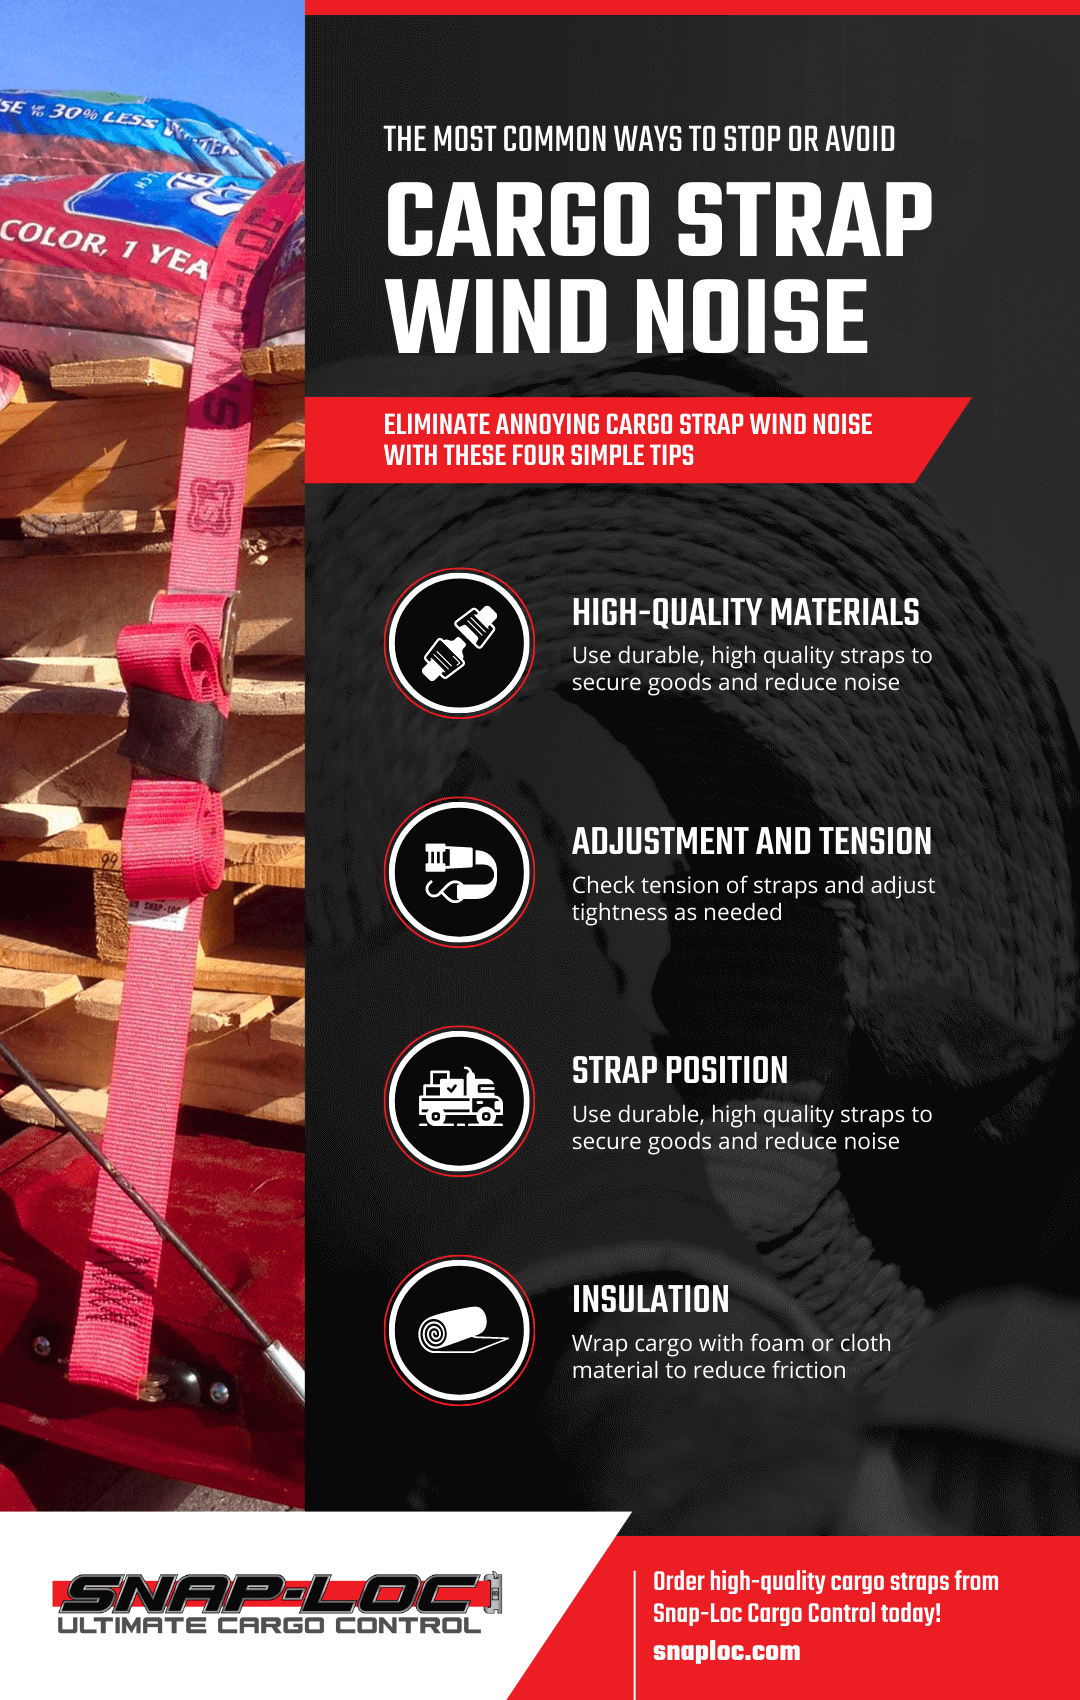 The Most Common Ways To Stop or Avoid Cargo Strap Wind Noise Infographic